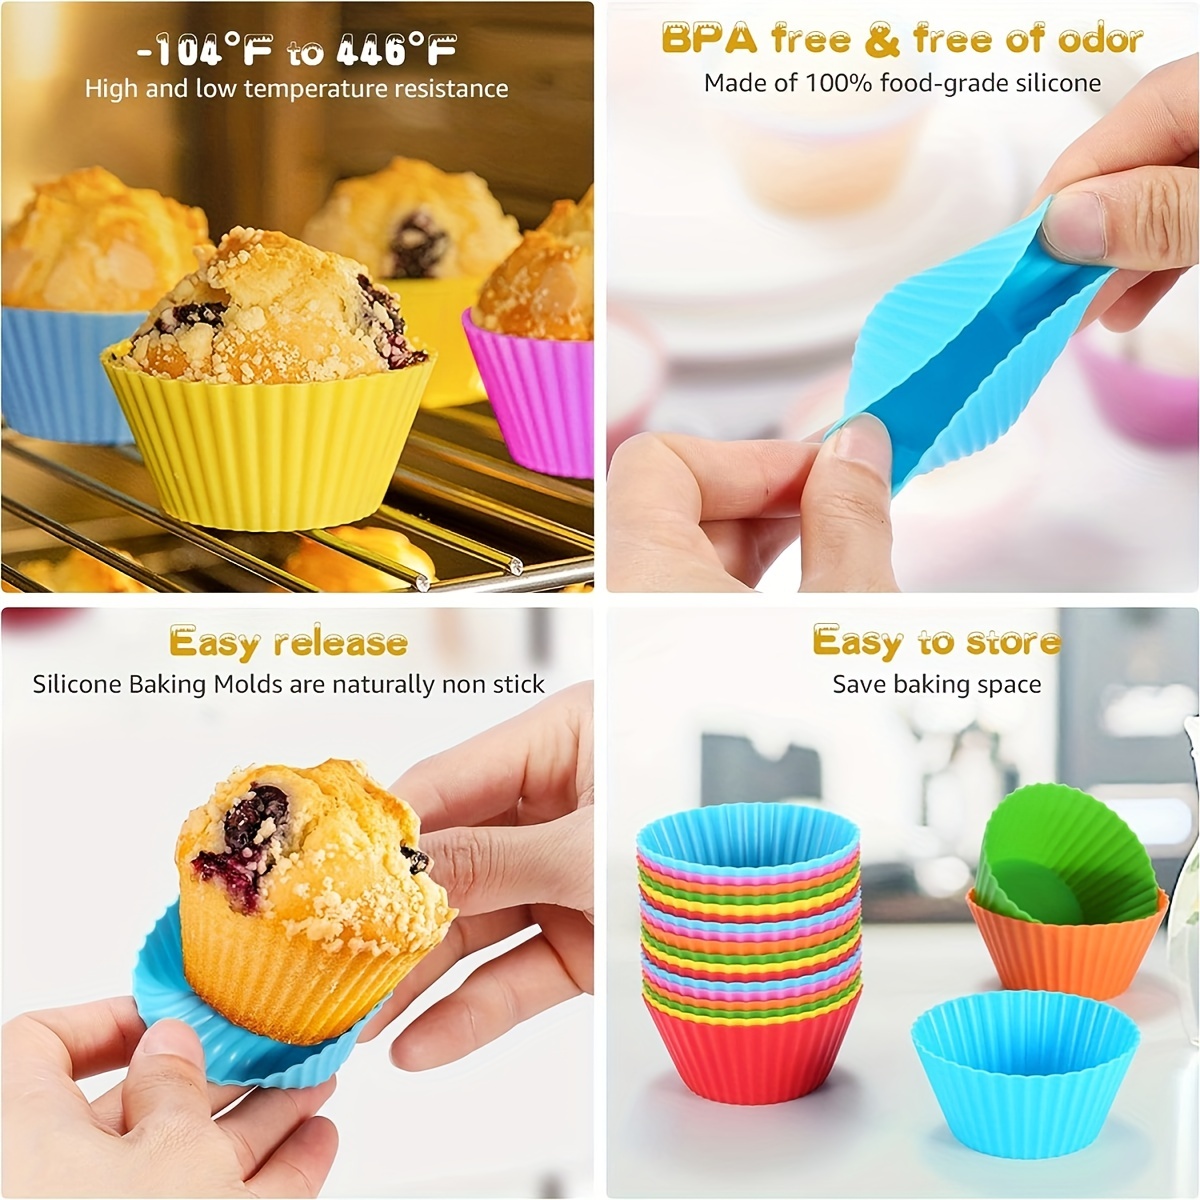 Using Cupcake Silicone Liners